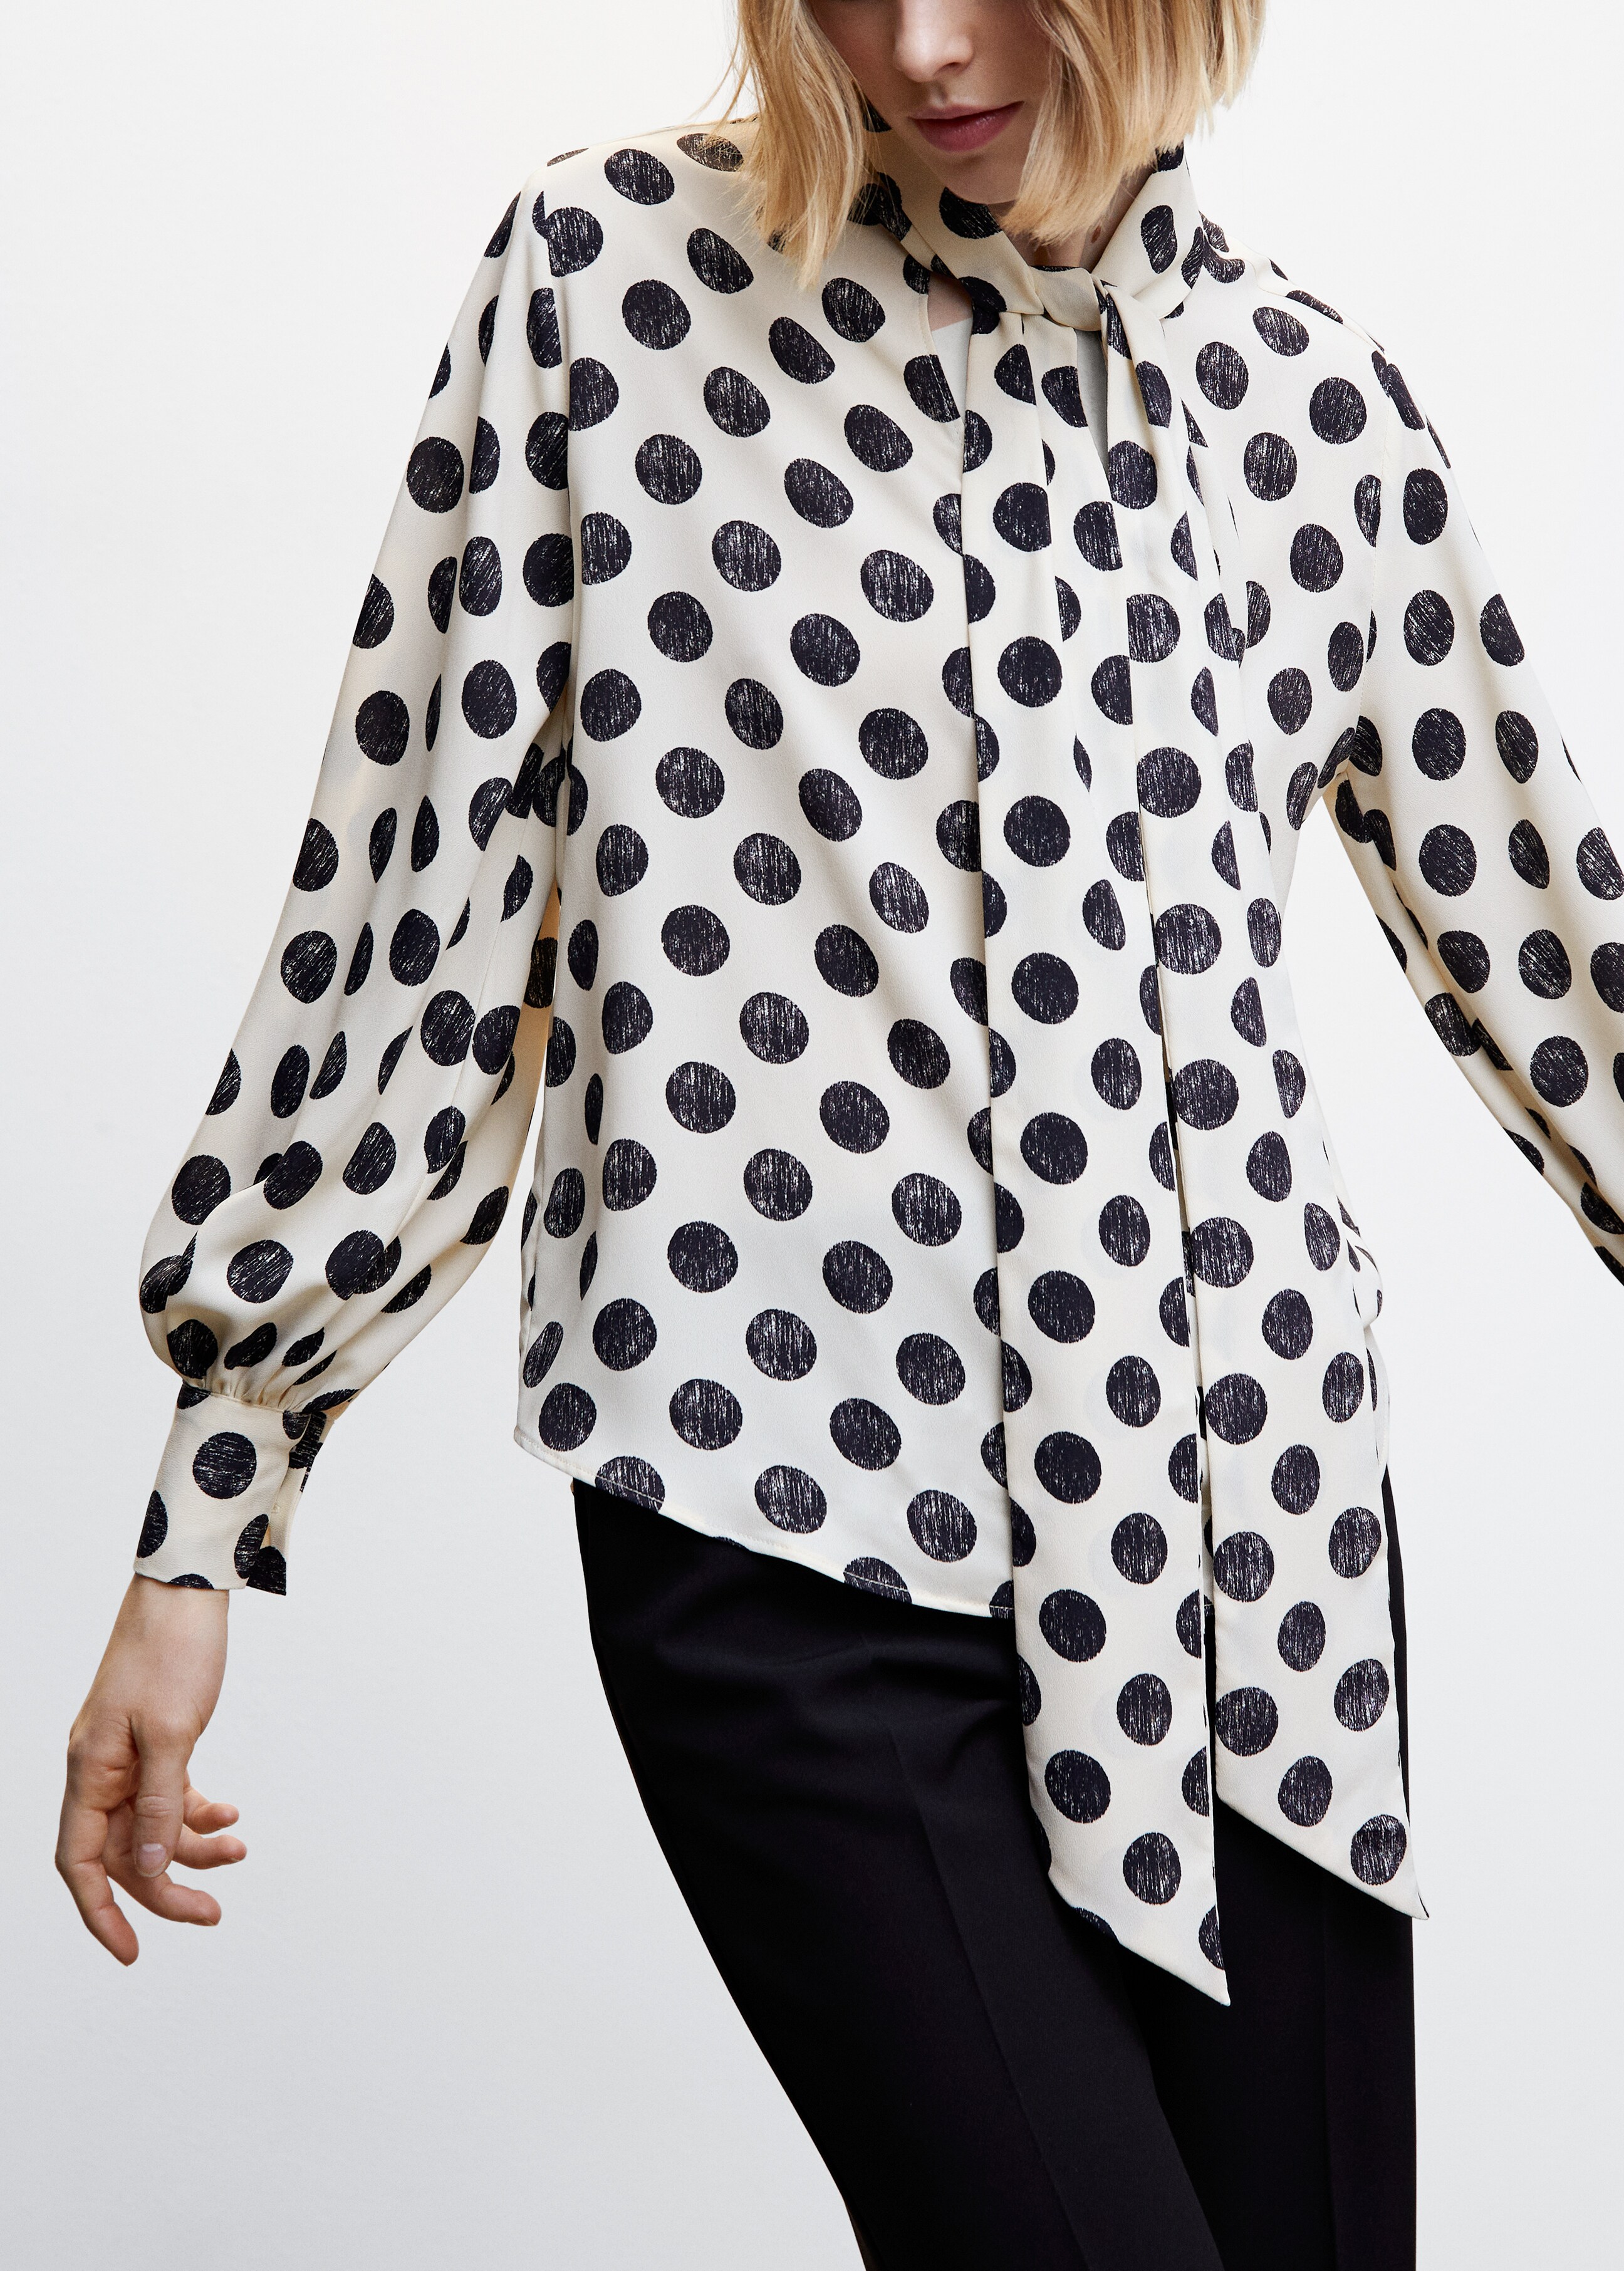 Bow polka-dot blouse - Details of the article 6